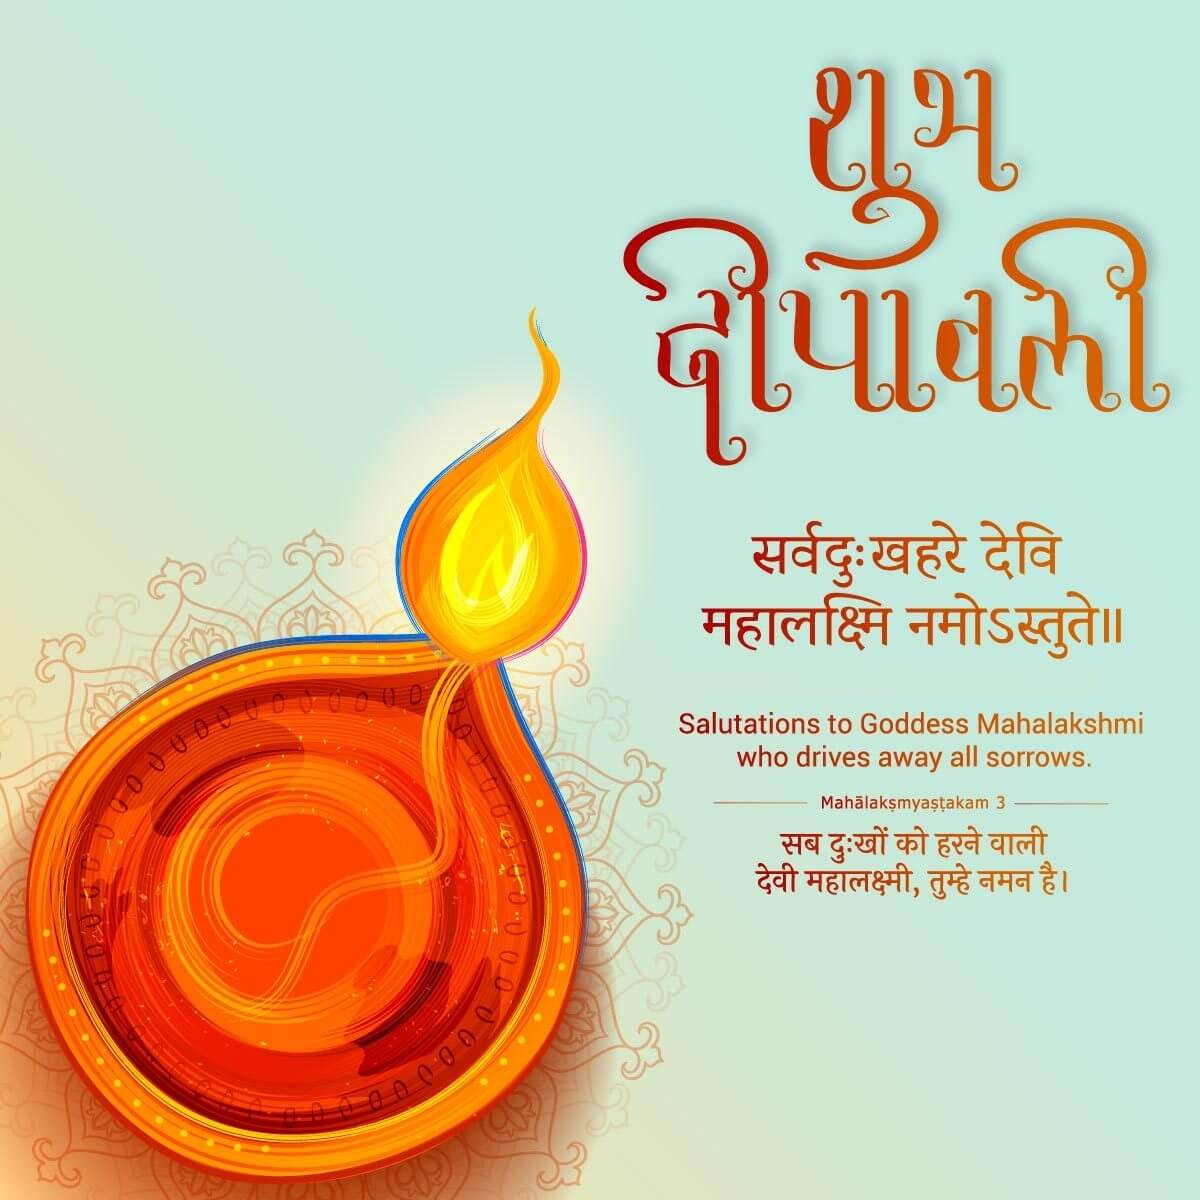 Happy Diwali wishes images quotes in Sanskrit